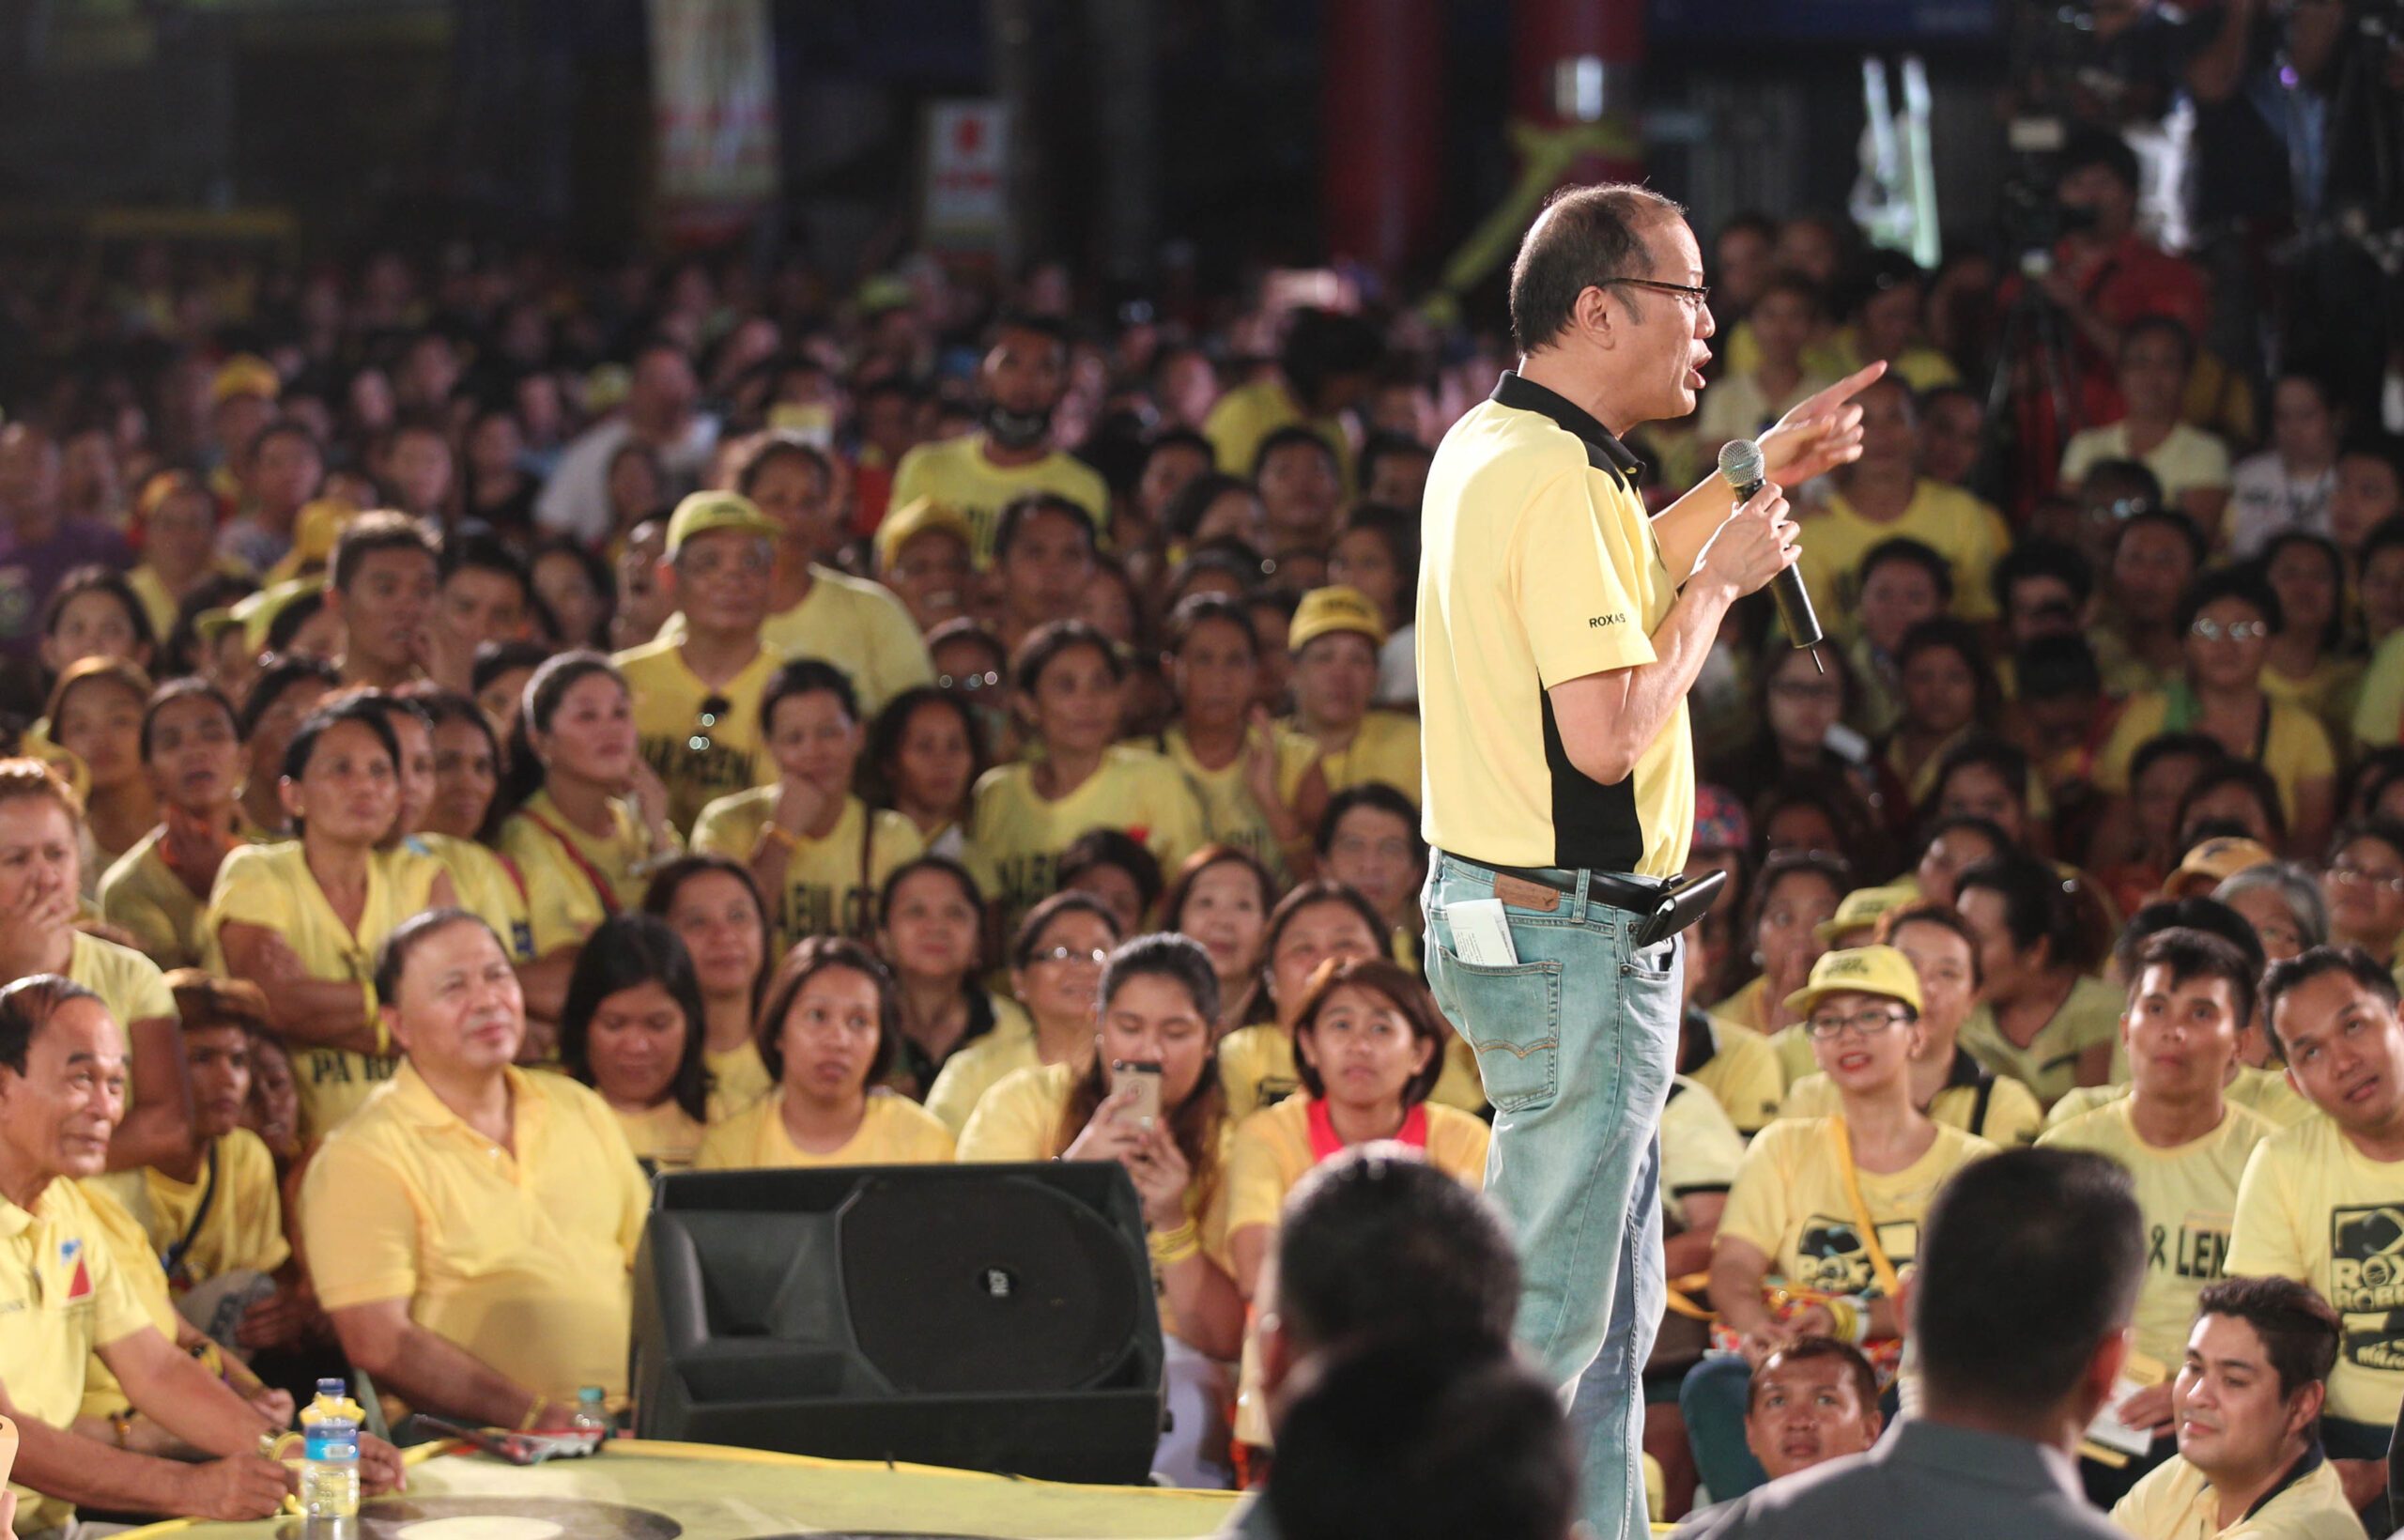 Aquino campaigns vs Duterte: Don’t be swayed by his ‘uniqueness’